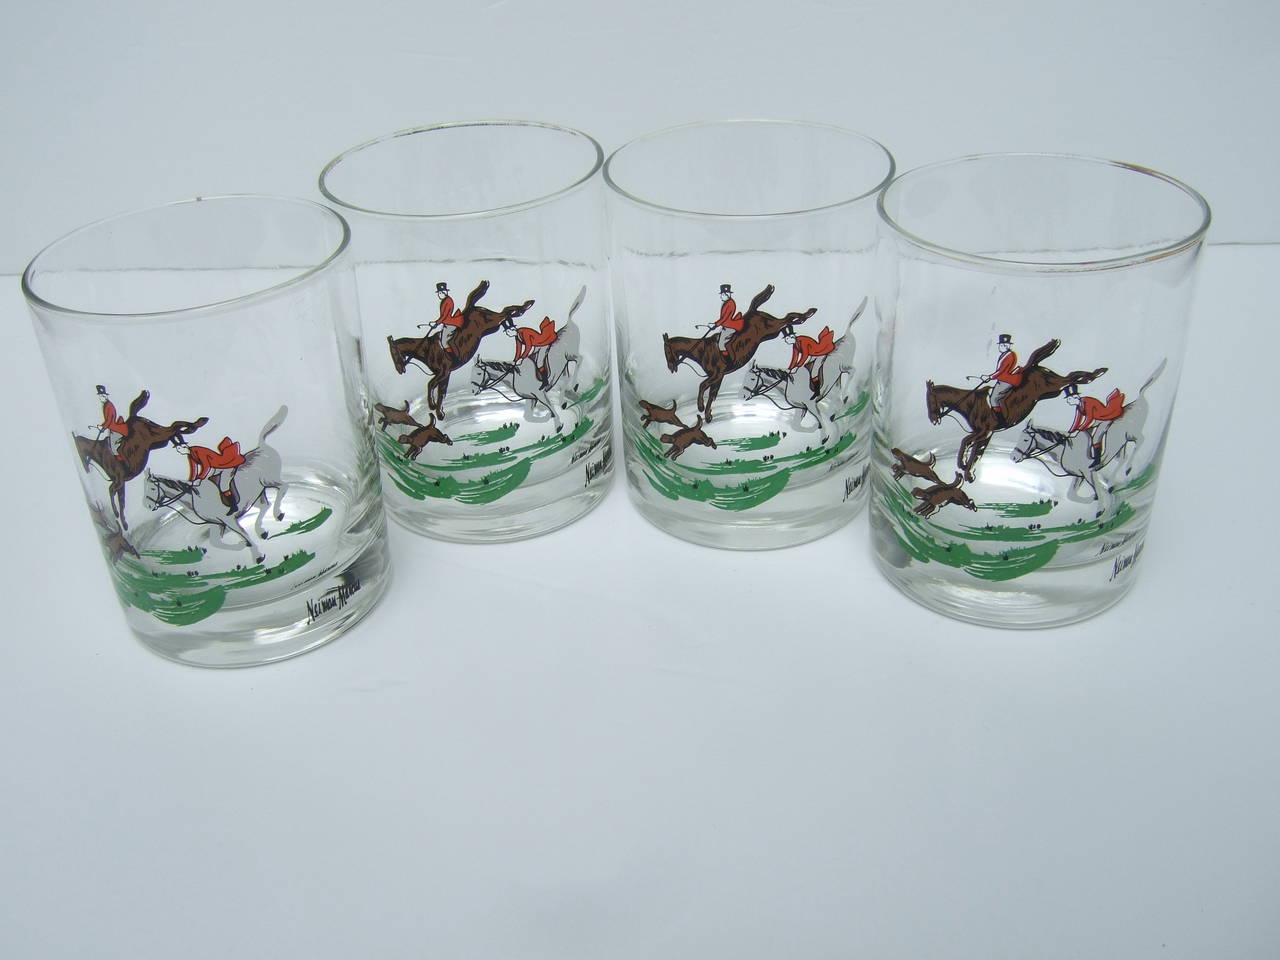 Neiman Marcus Set of four equestrian drinking glasses c 1980
The four bar glasses are designed with decal scenes of English 
style horsemen with hunt dogs in pursuit of an elusive fox 

Each glass has the same hunt scene illustration
Each glass